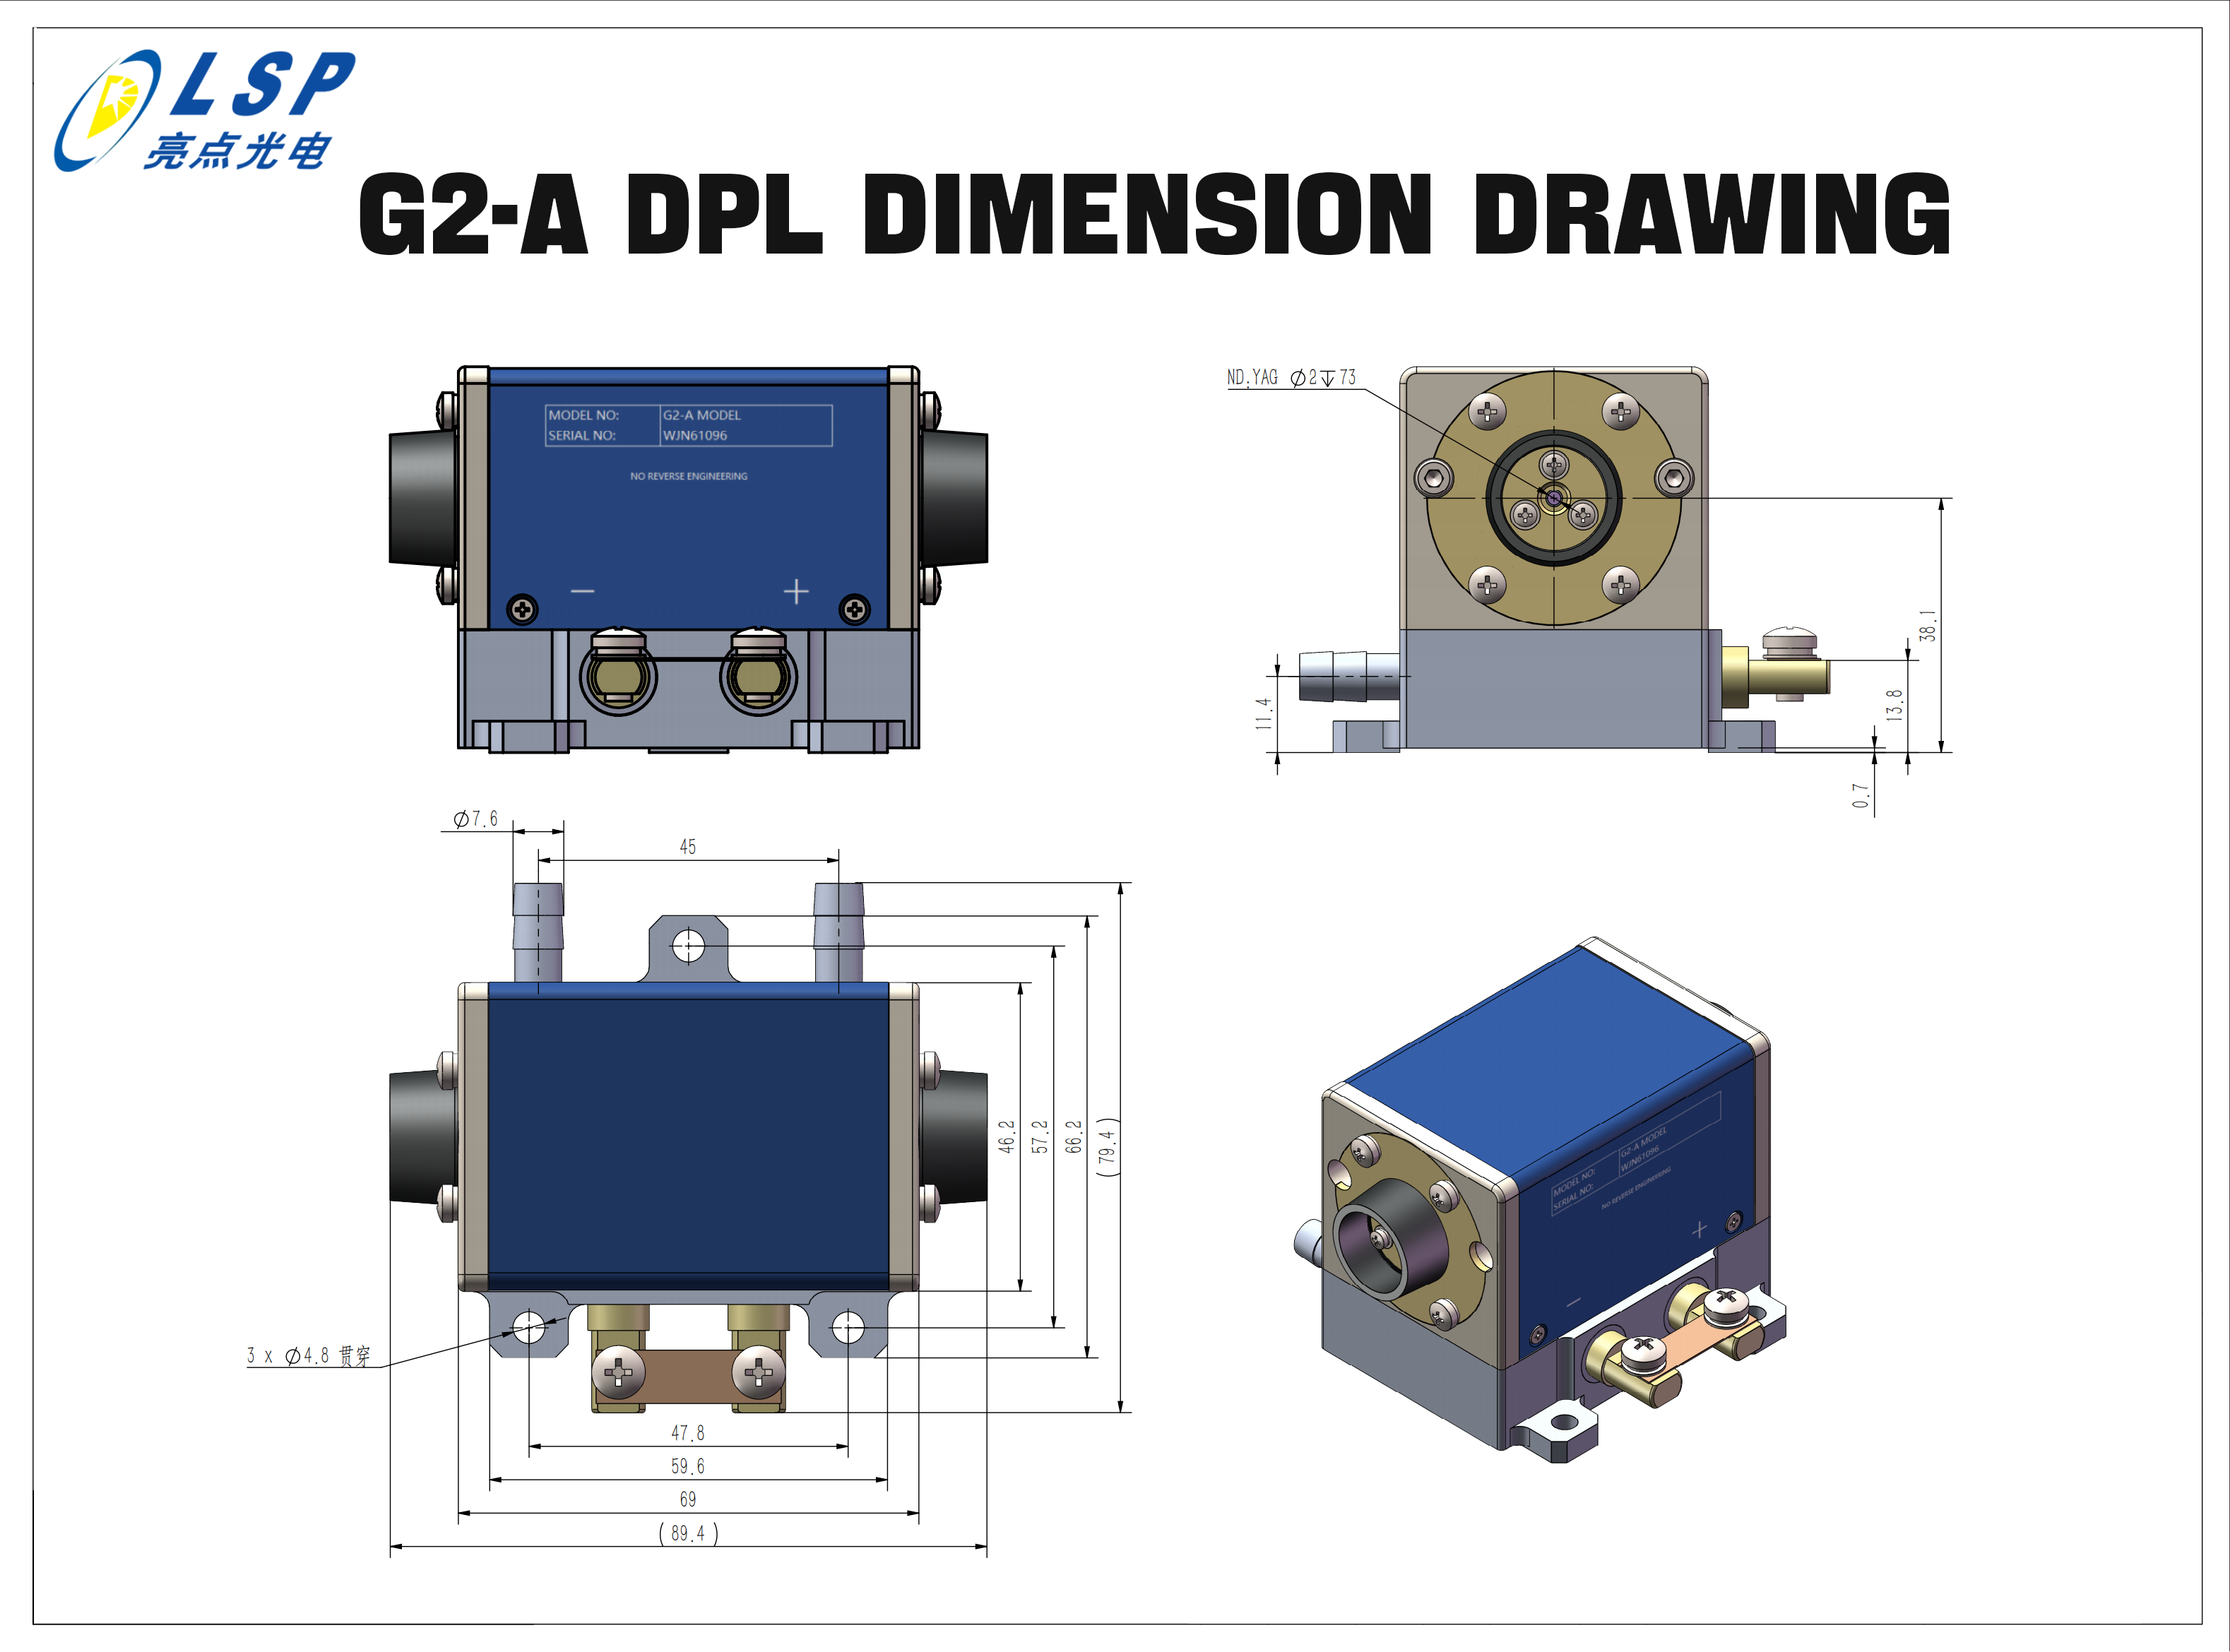 Dimension Drawing of G2-A